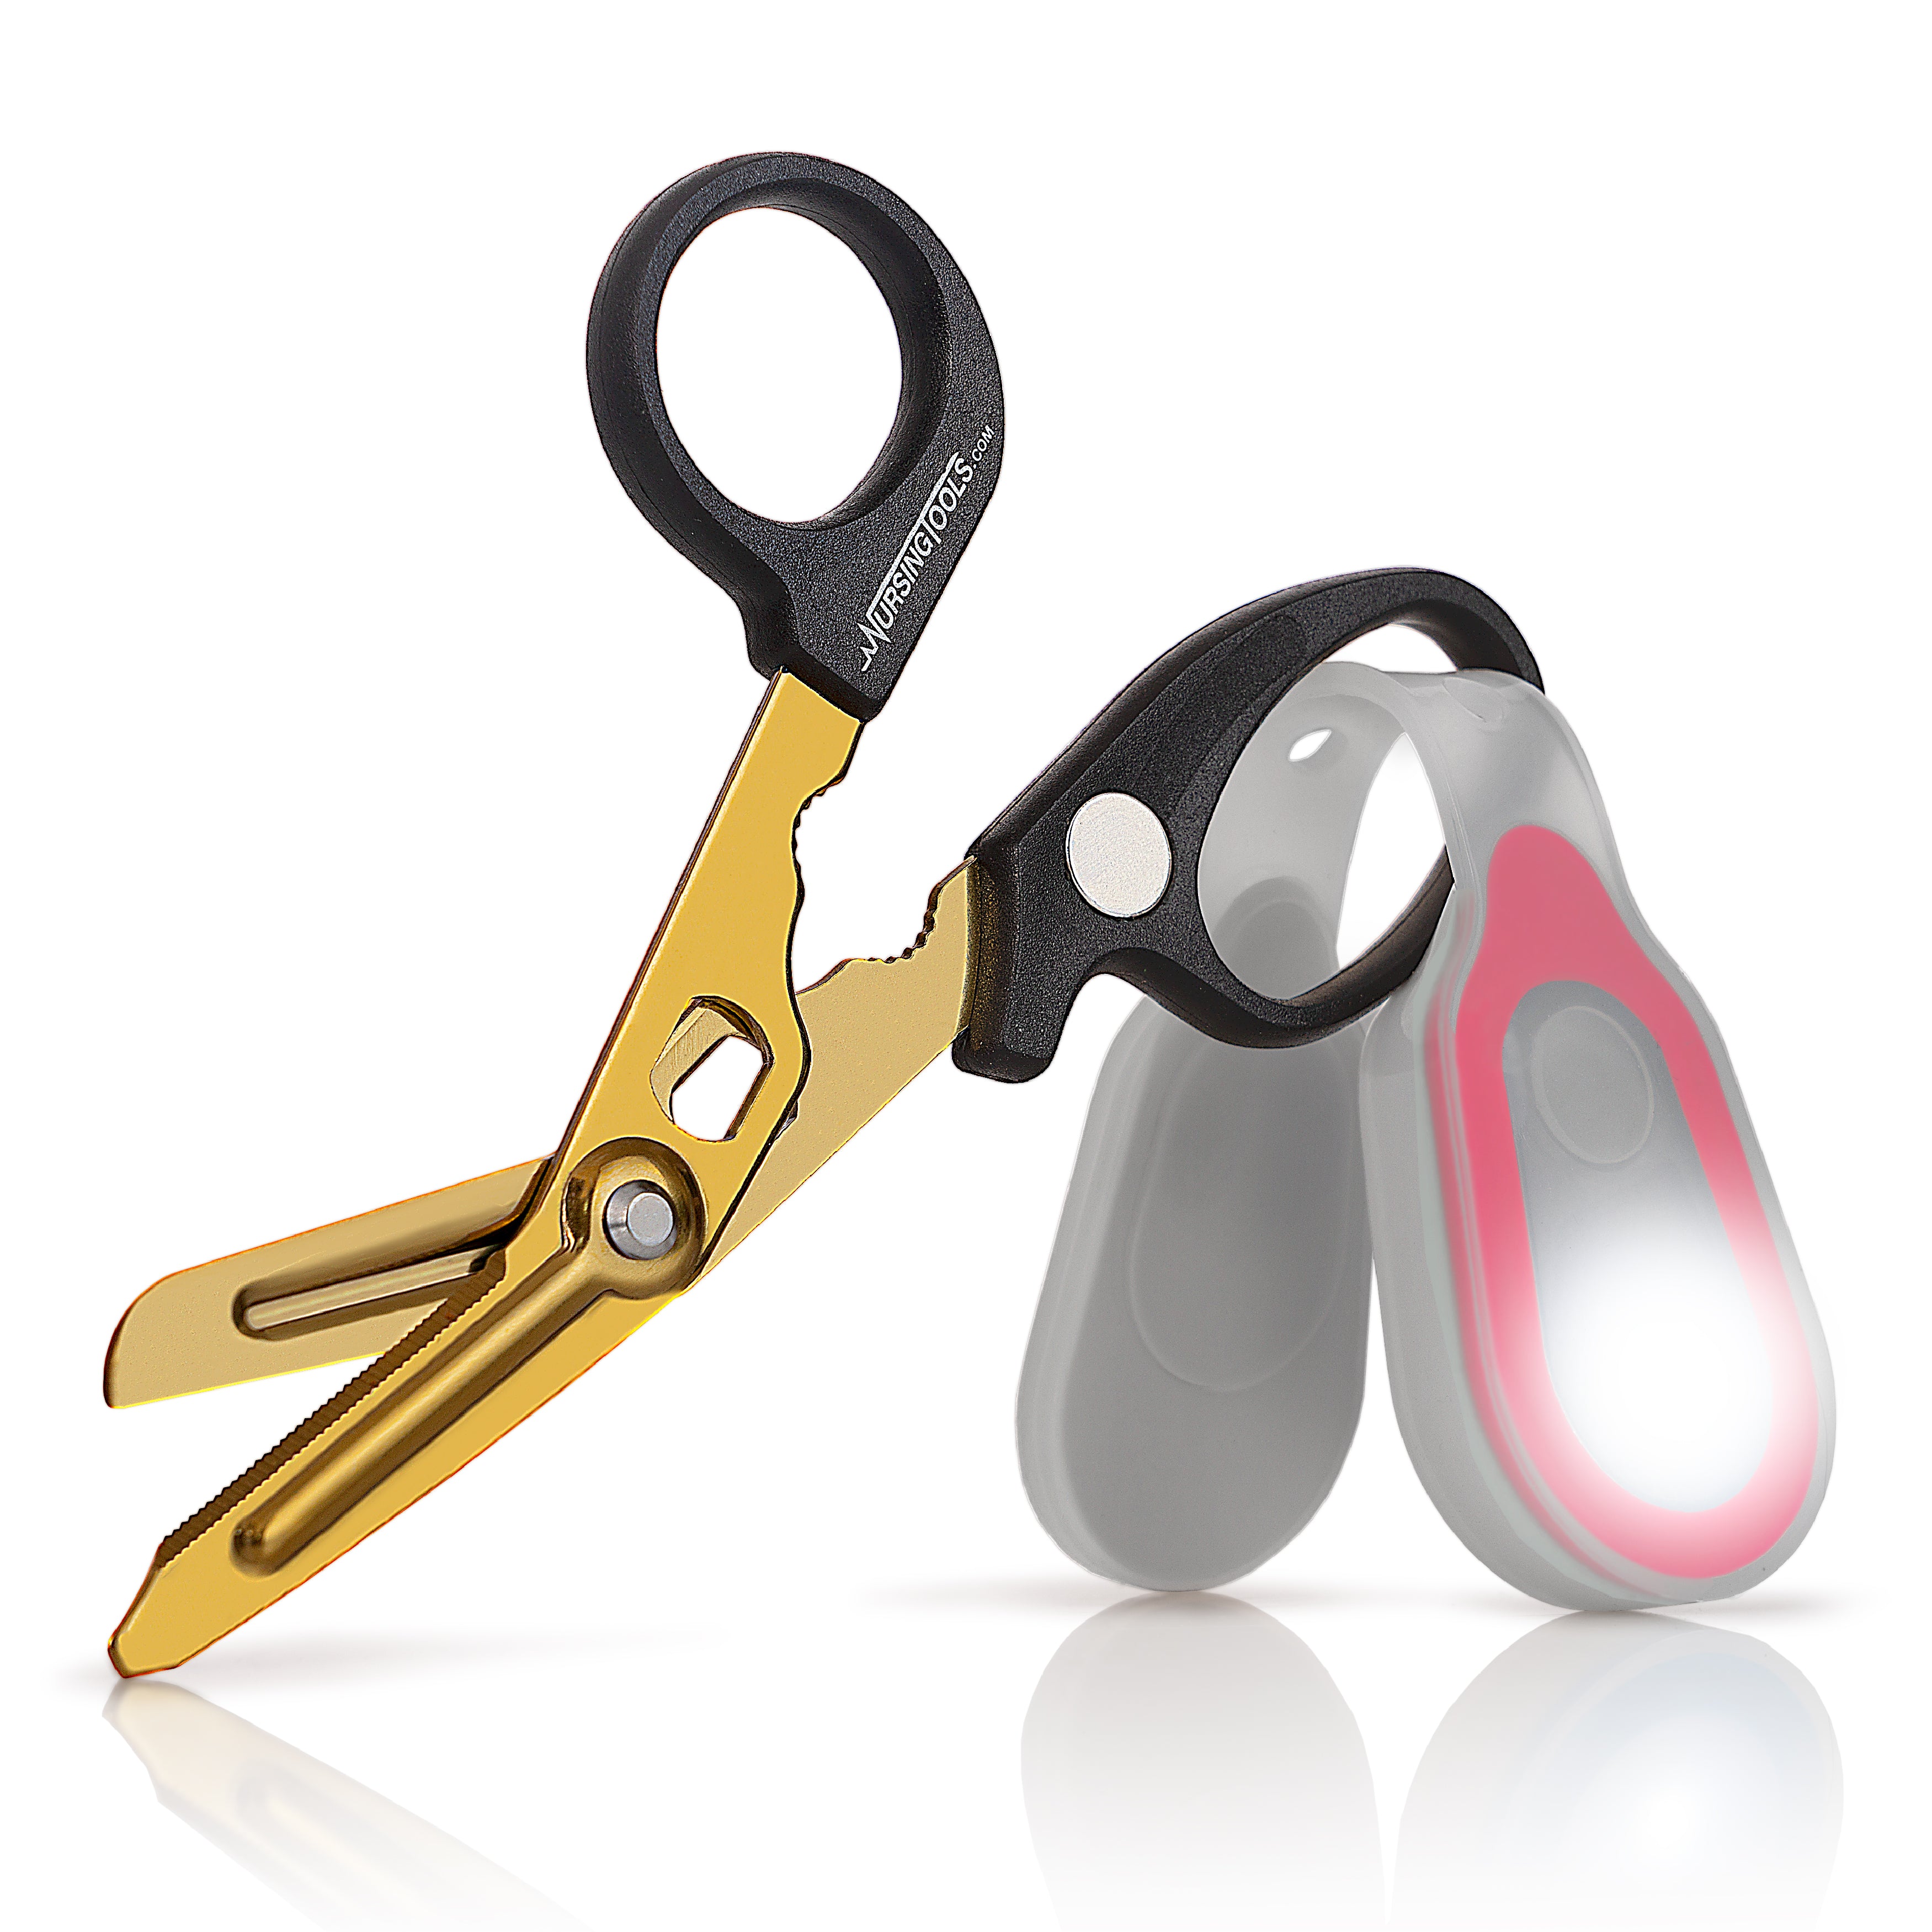  Hummingbird 4-in-1 Medical Scissors - Compact Pocket Size  Trauma Shears with Badge Reels for Nurses, Students, Respiratory  Therapists, Veterinarians, and Medical Professionals (Black) : Industrial &  Scientific